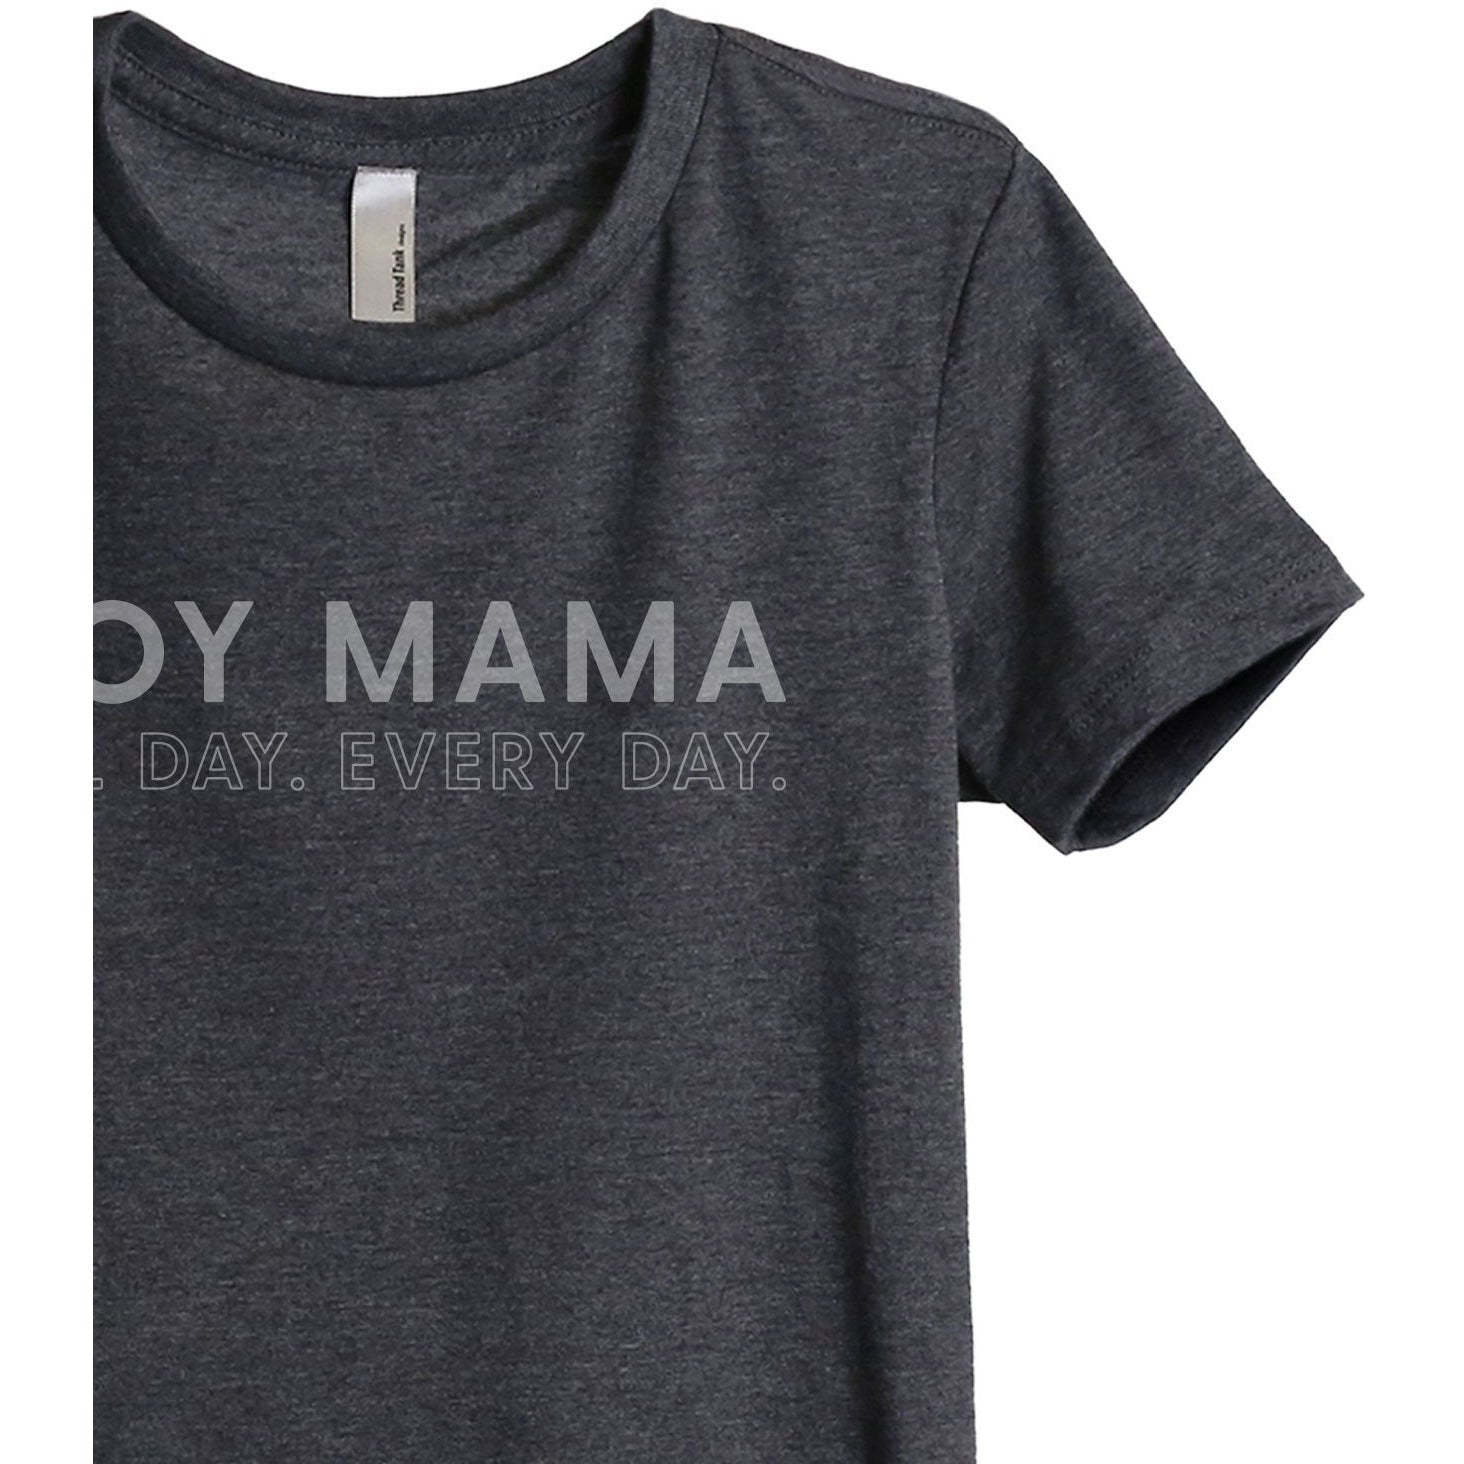 Boy Mama All Day Every Day Women's Relaxed Crewneck T-Shirt Top Tee Charcoal Grey Zoom Details